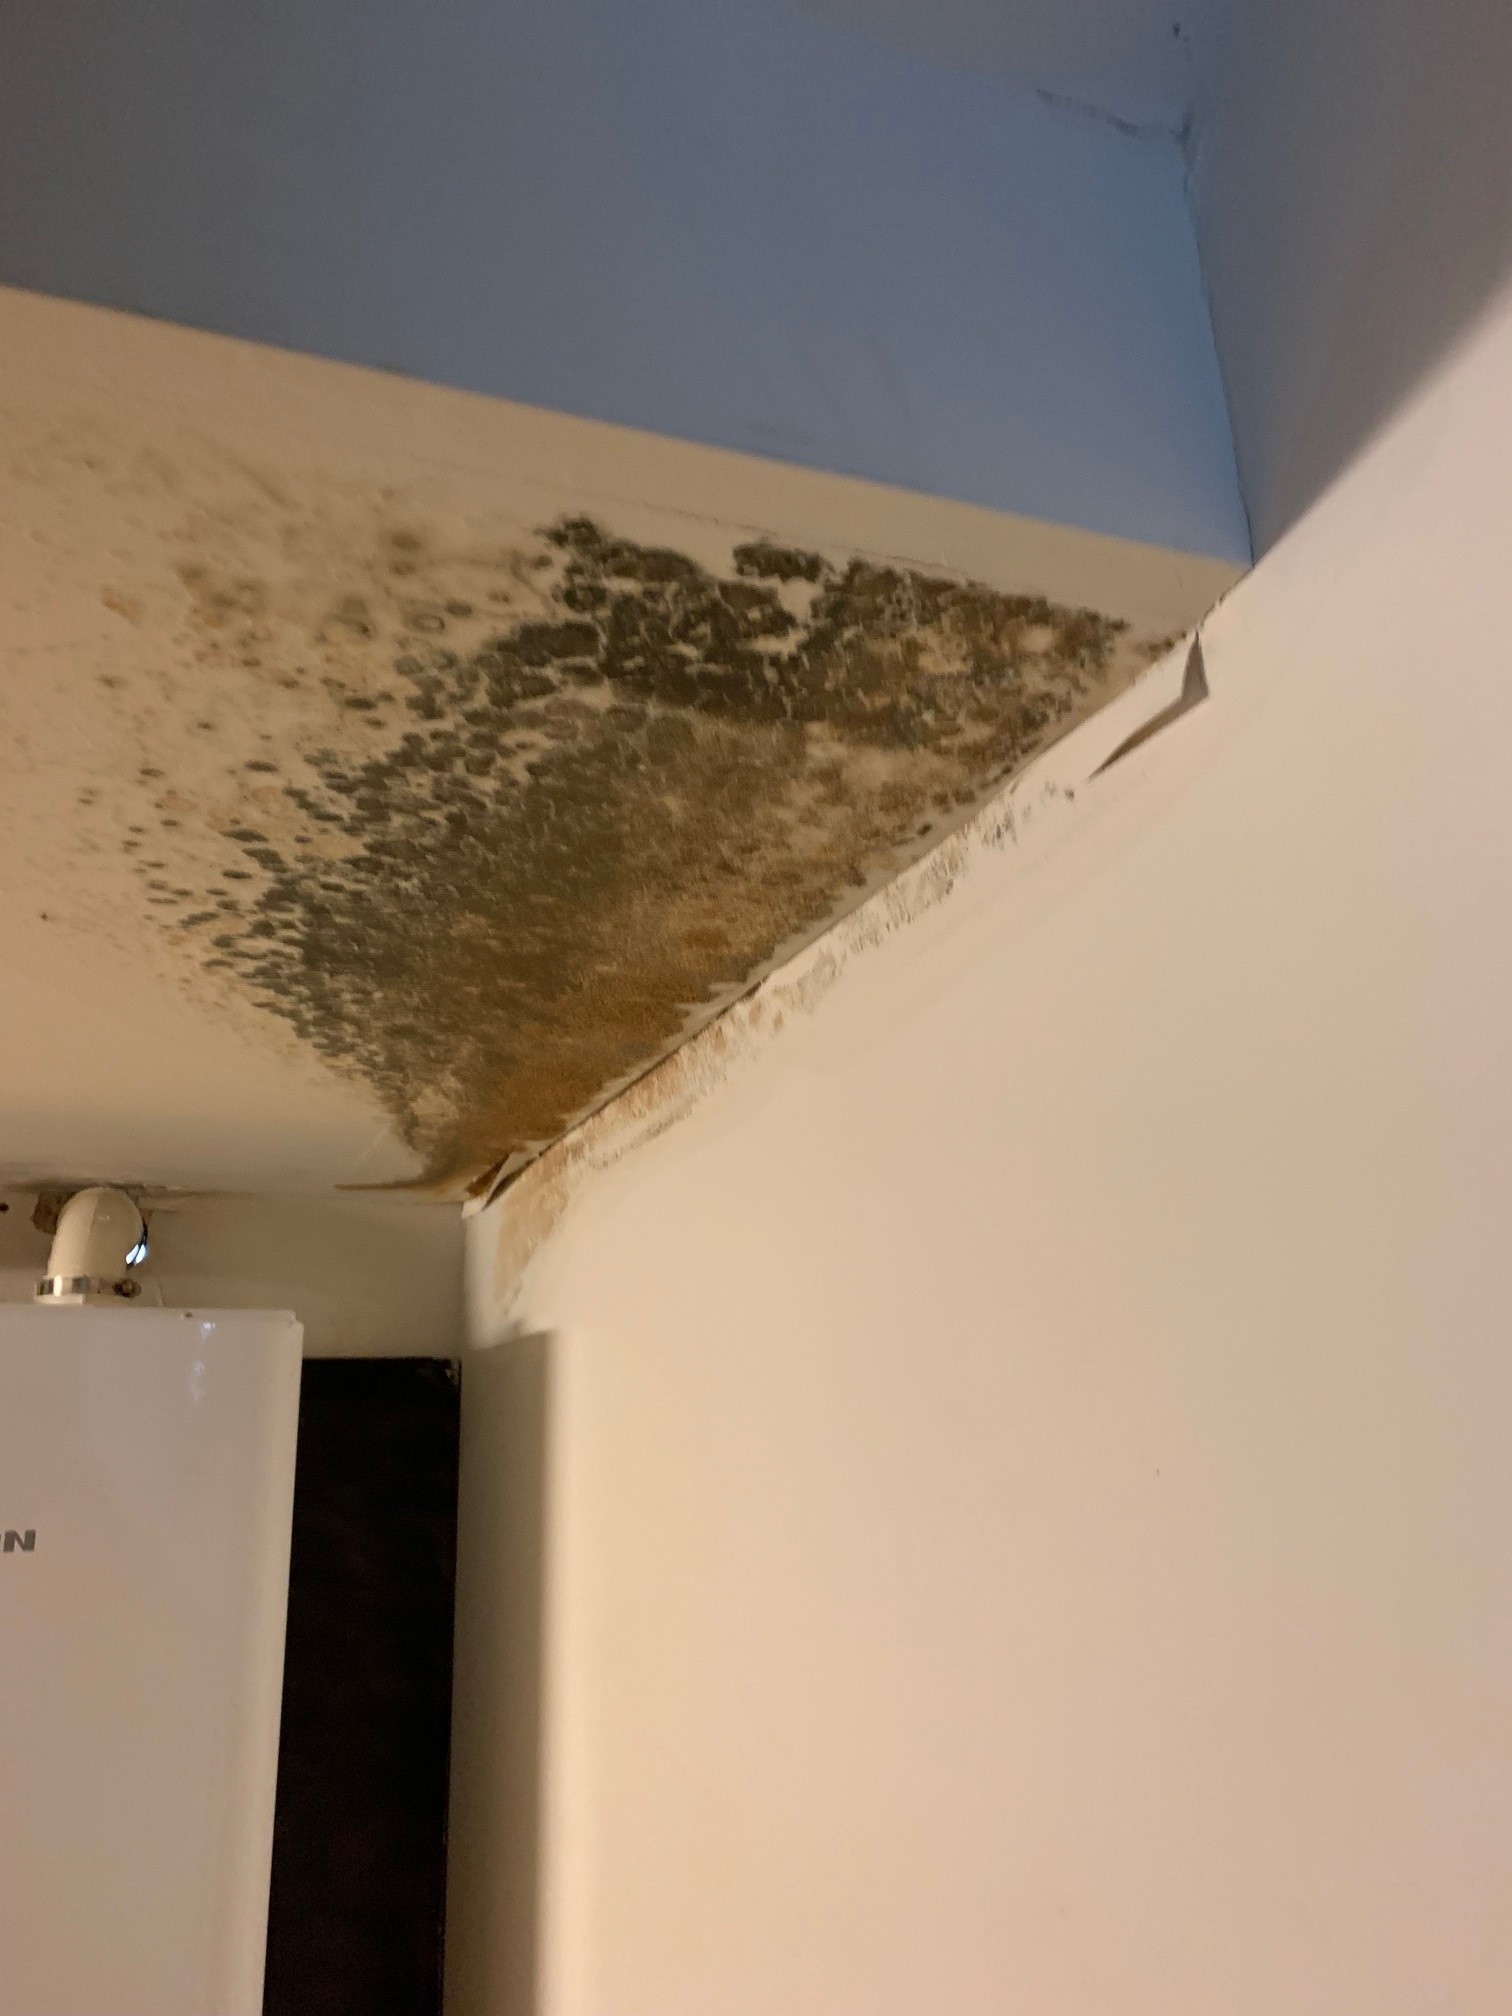 Mold in an NJ home.